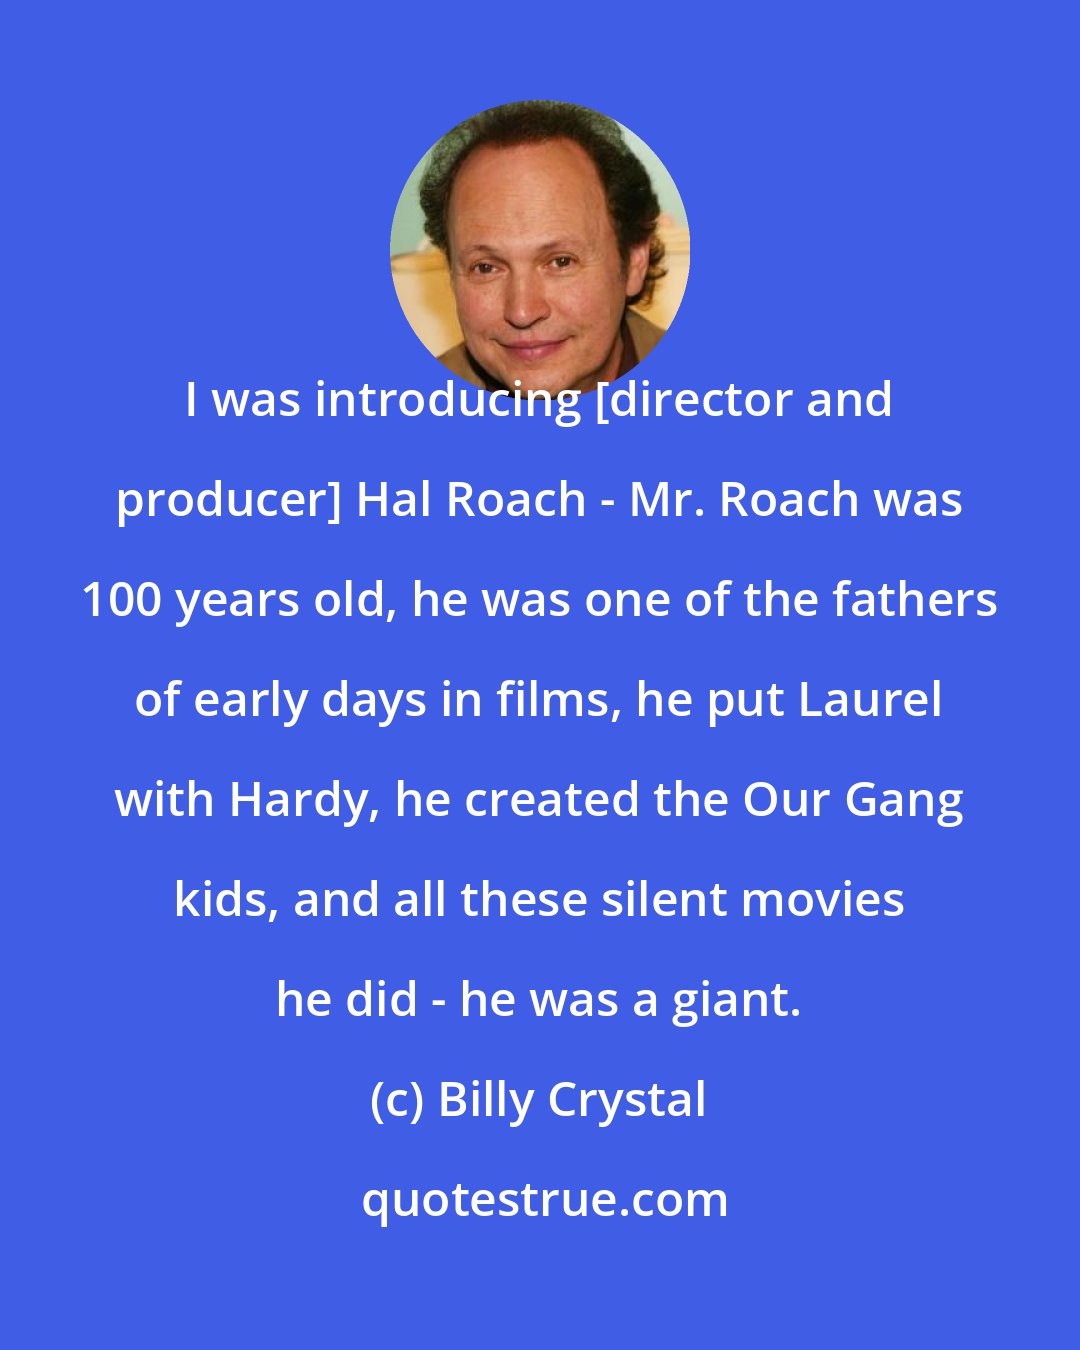 Billy Crystal: I was introducing [director and producer] Hal Roach - Mr. Roach was 100 years old, he was one of the fathers of early days in films, he put Laurel with Hardy, he created the Our Gang kids, and all these silent movies he did - he was a giant.